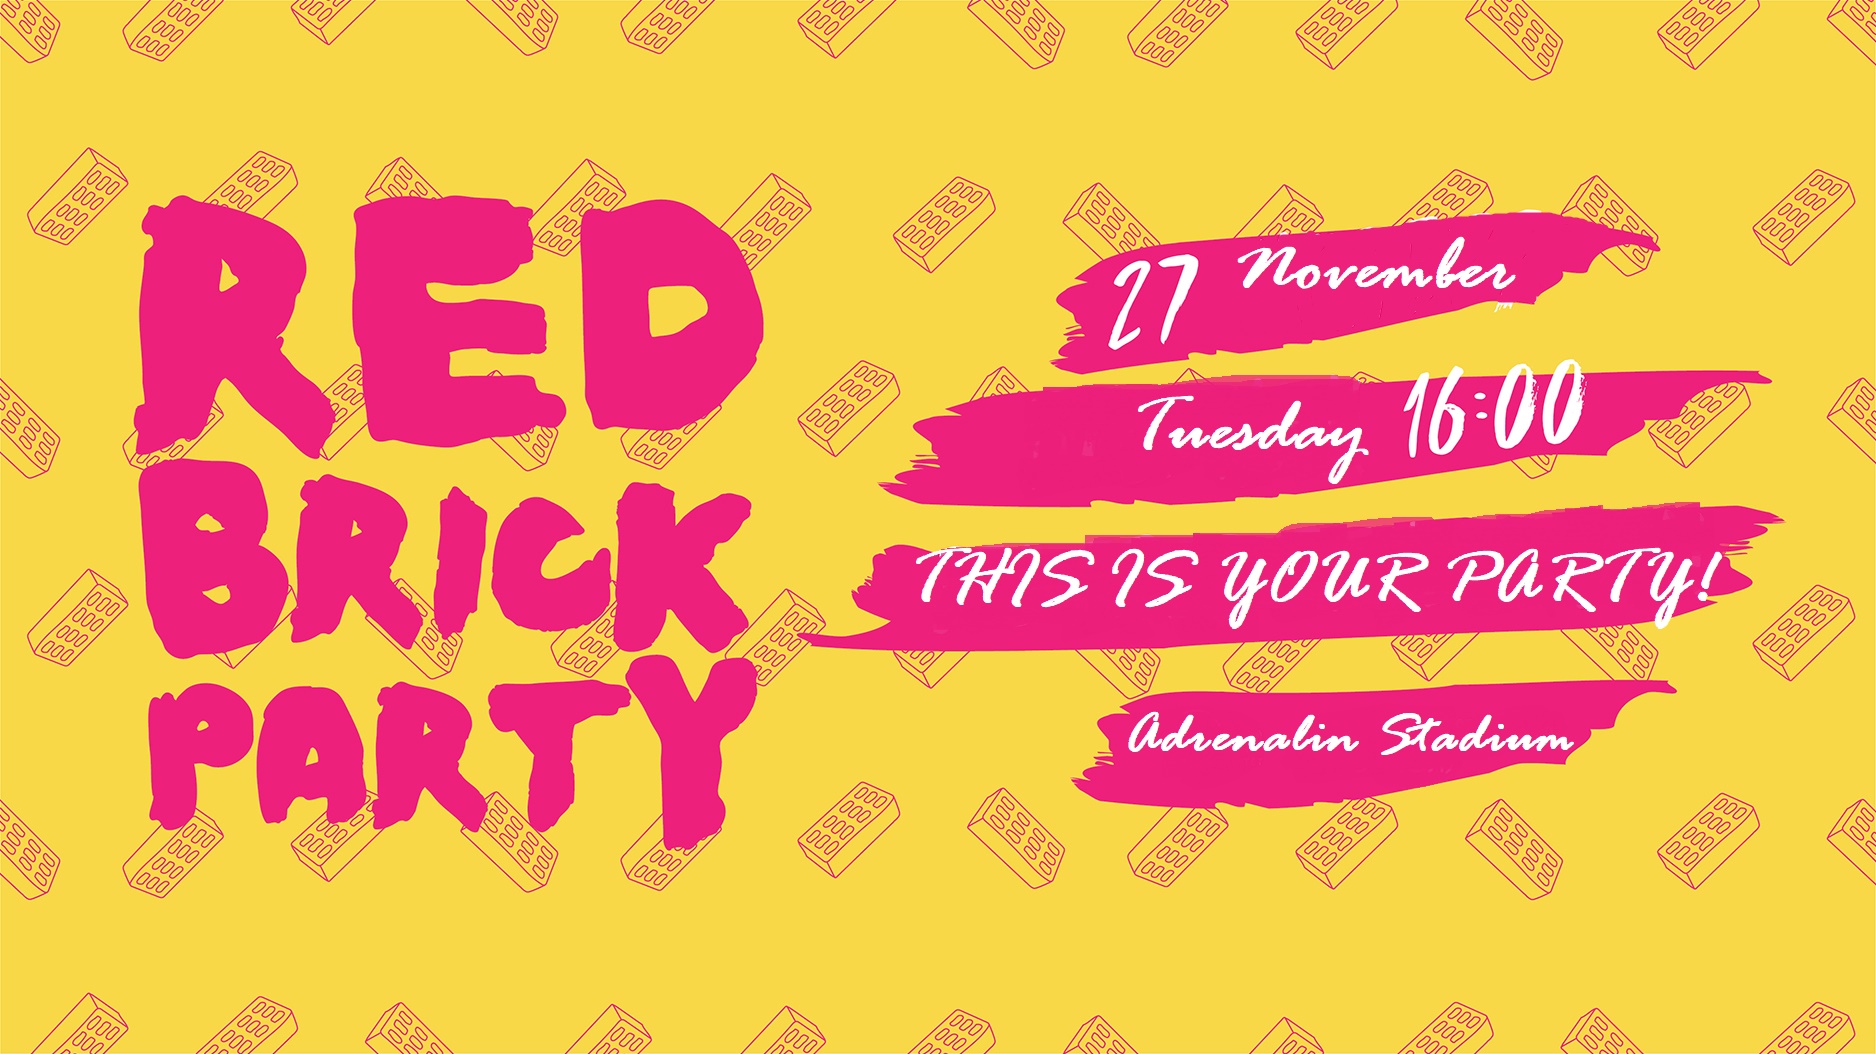 The Red Brick Party 2018